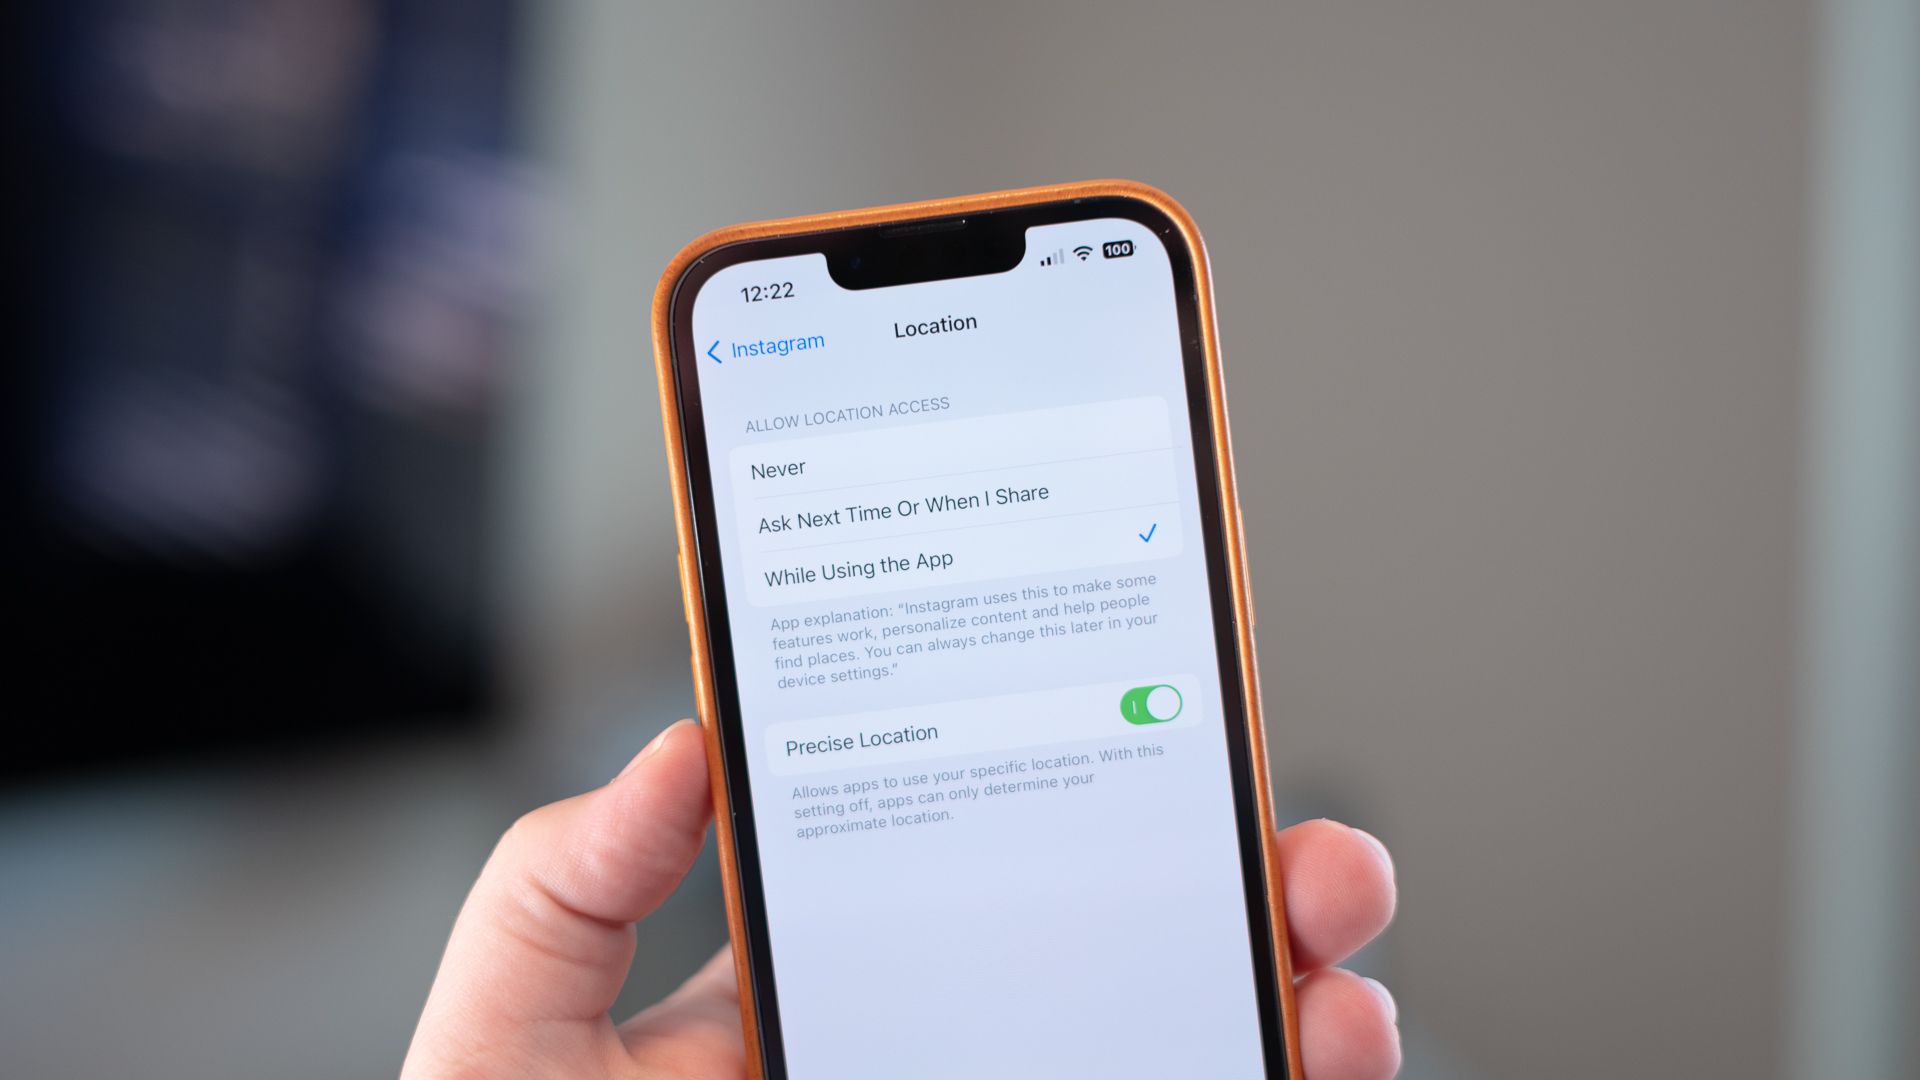 How to Disable Precise Location Tracking on iPhone or Android